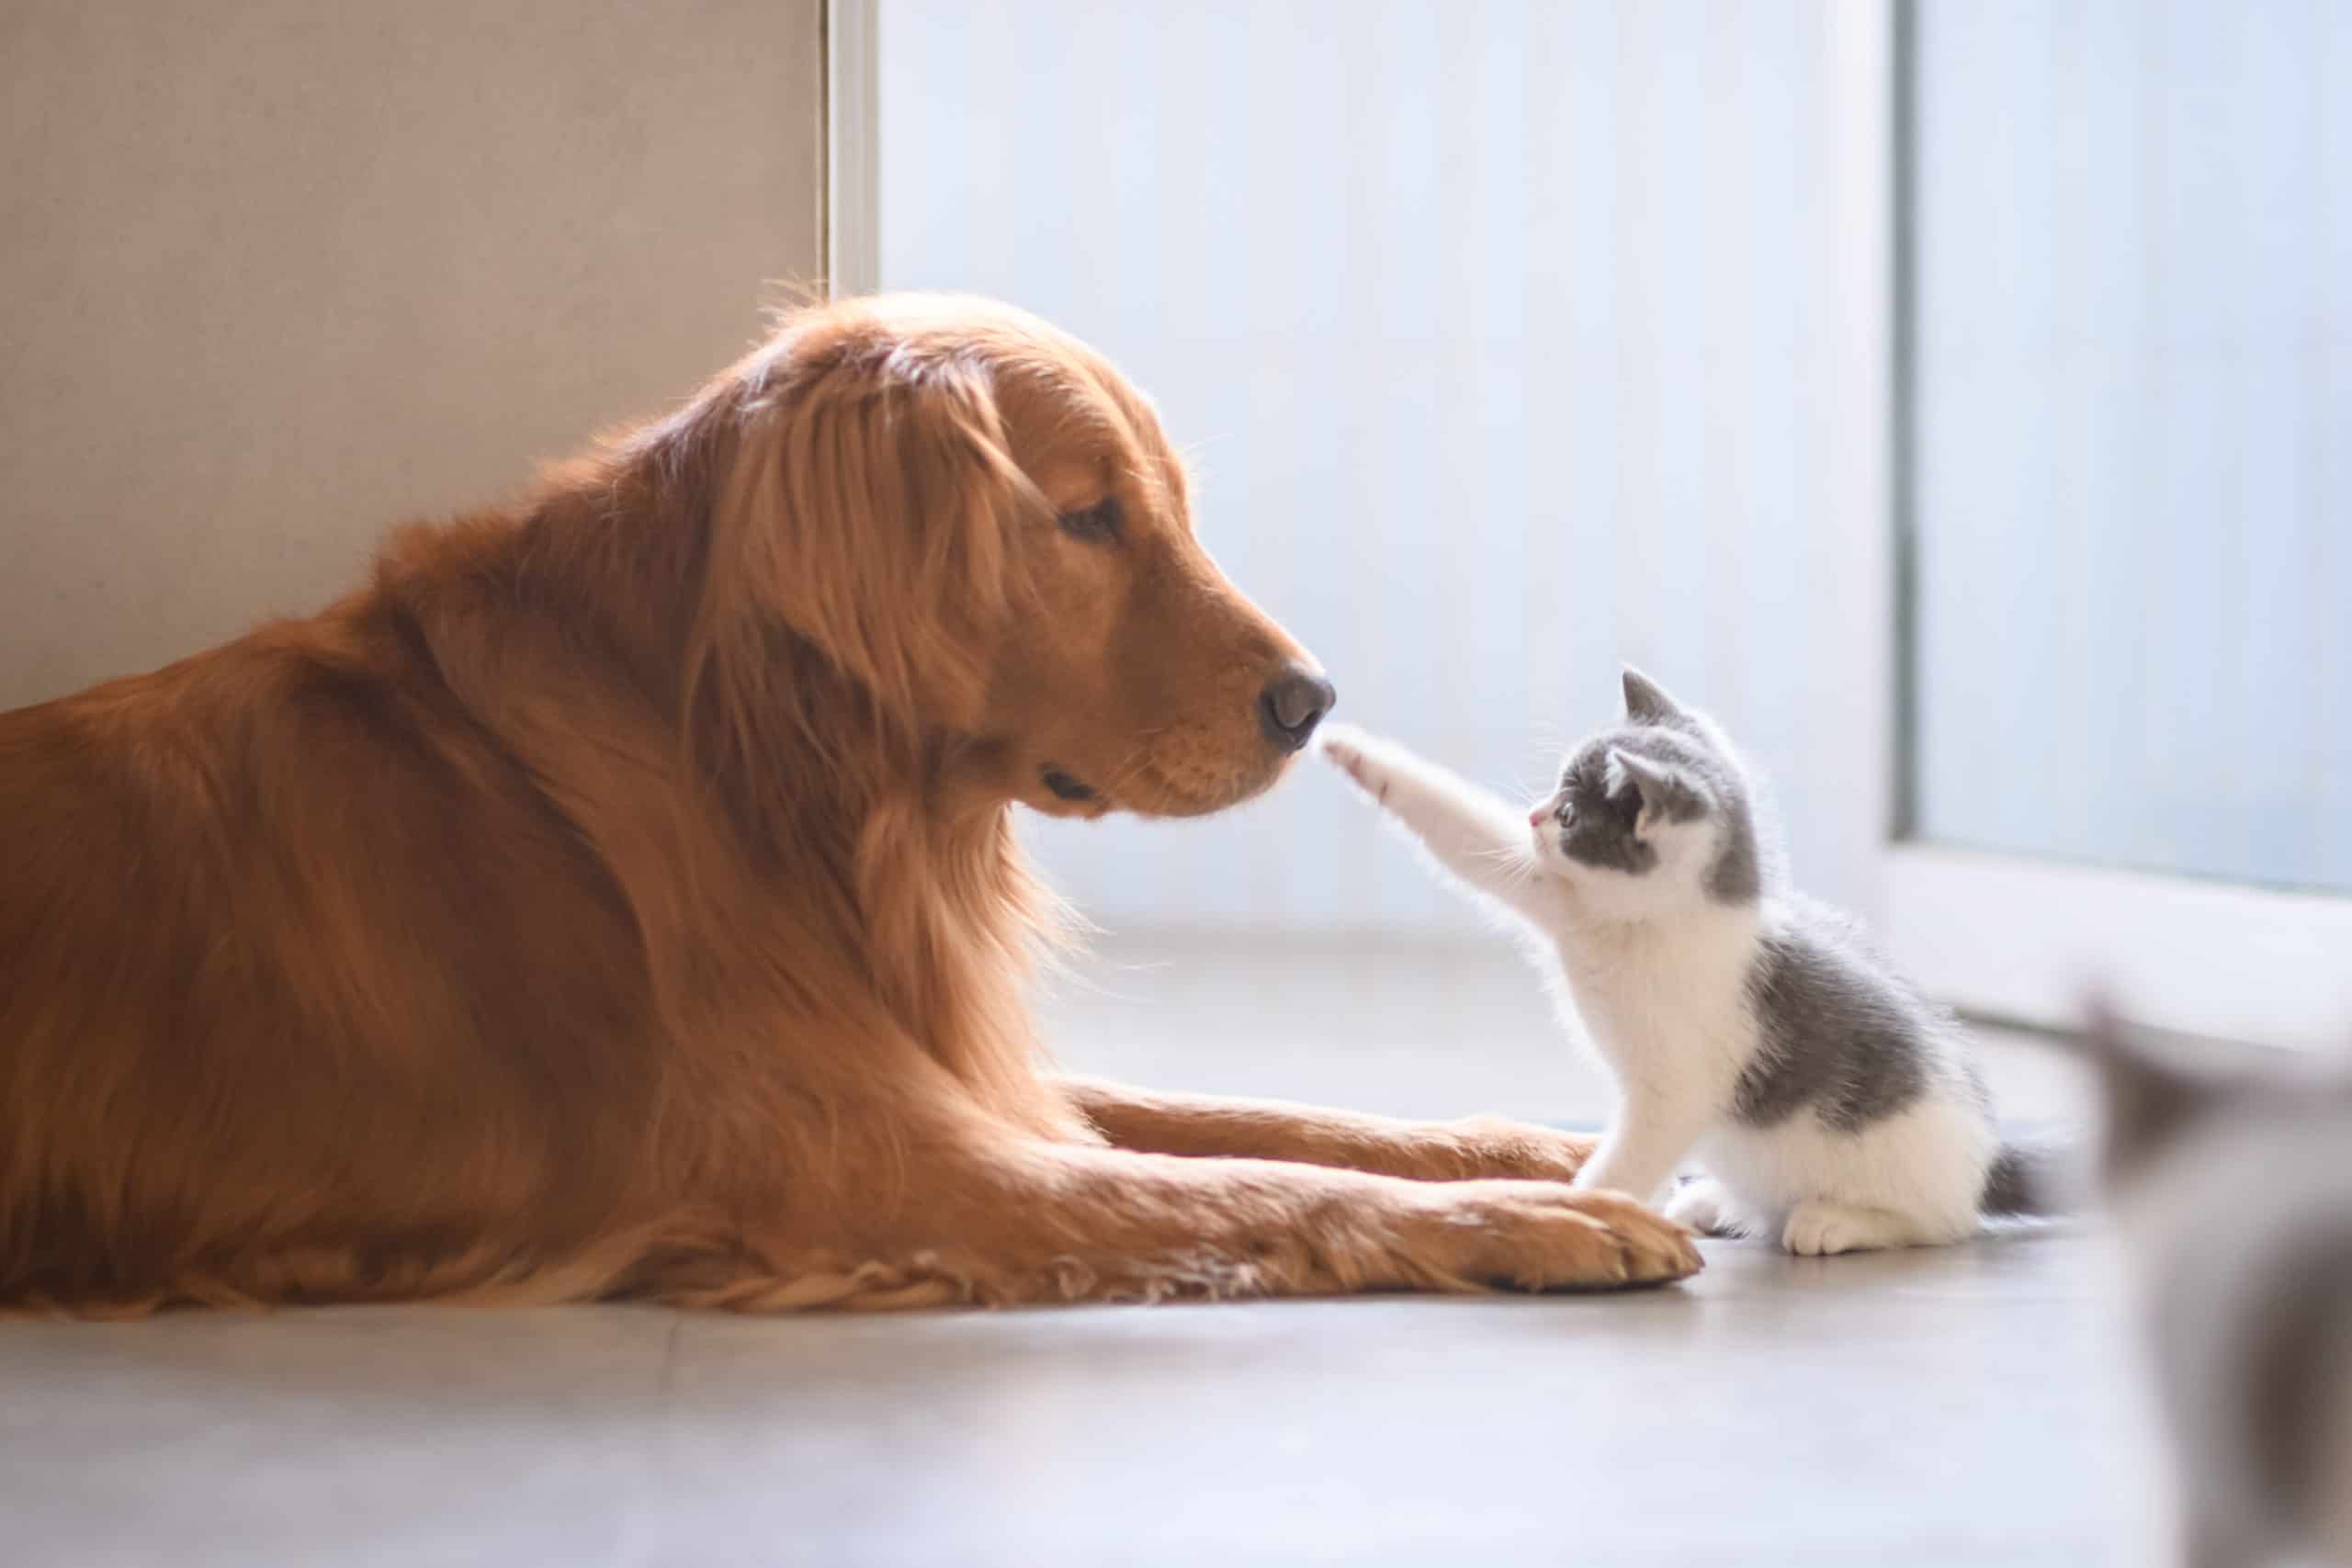 Do dogs or cats smell worse?